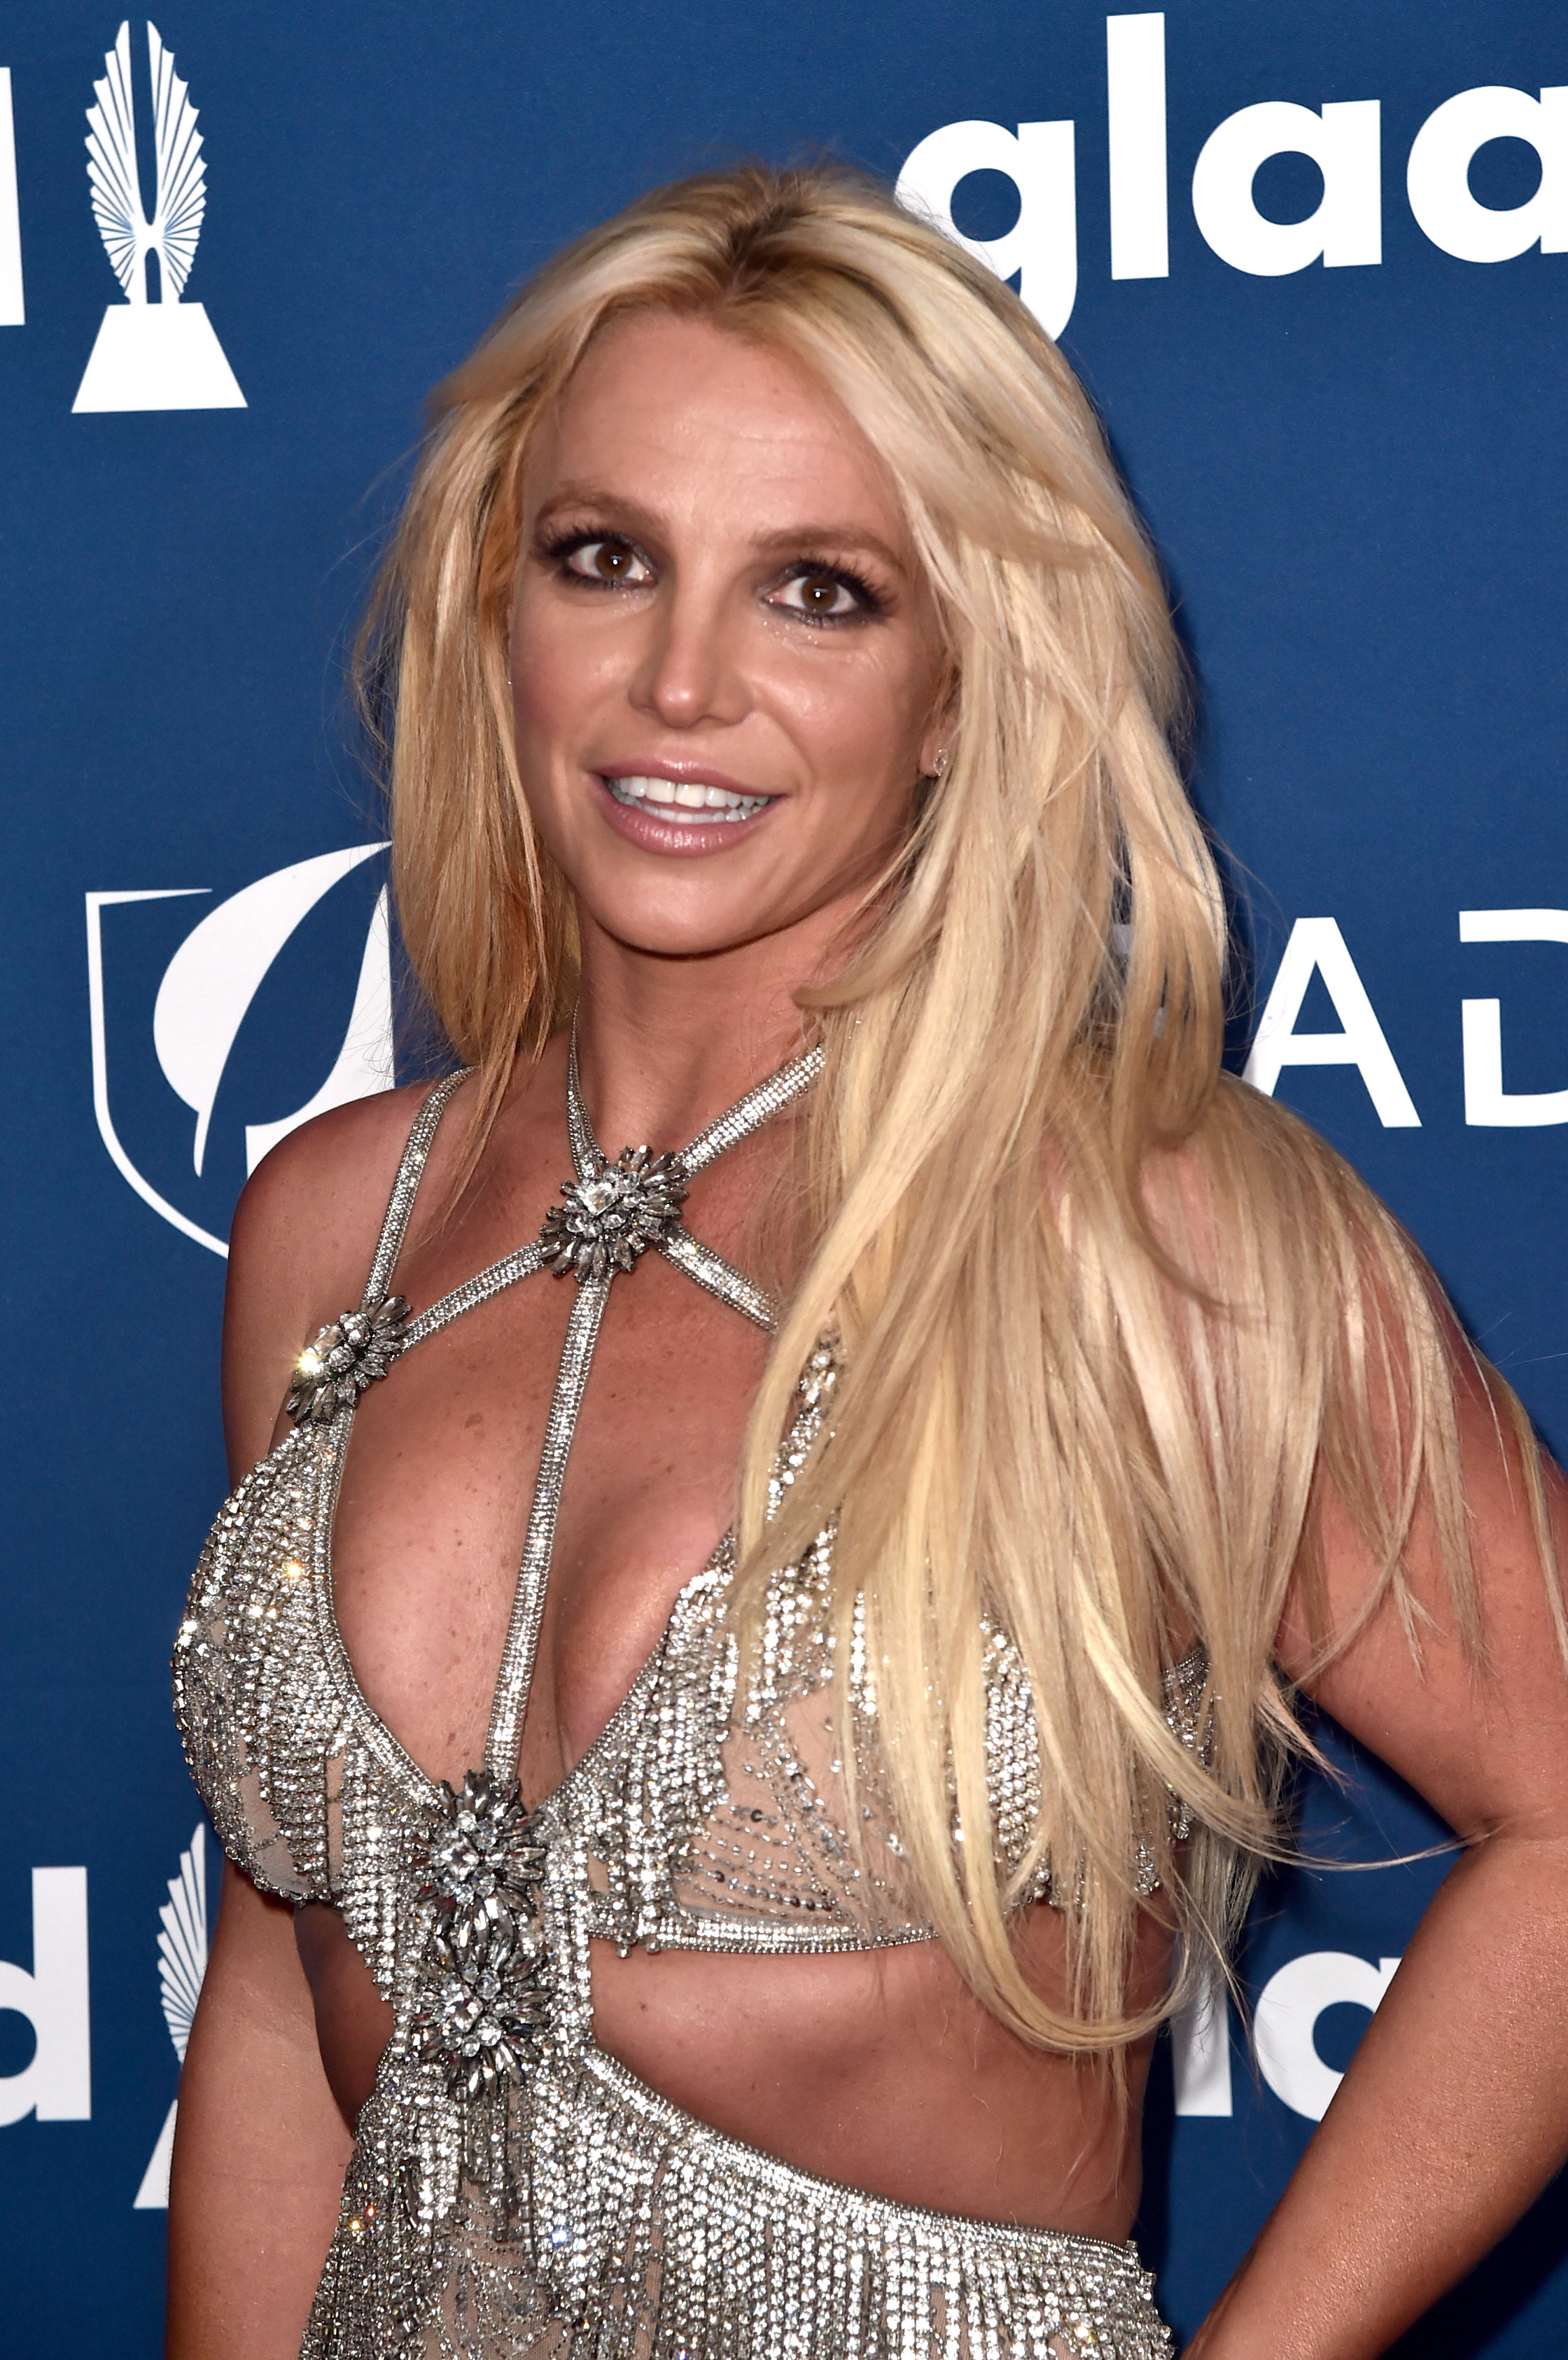 Britney smiling at an event as she poses for photographers